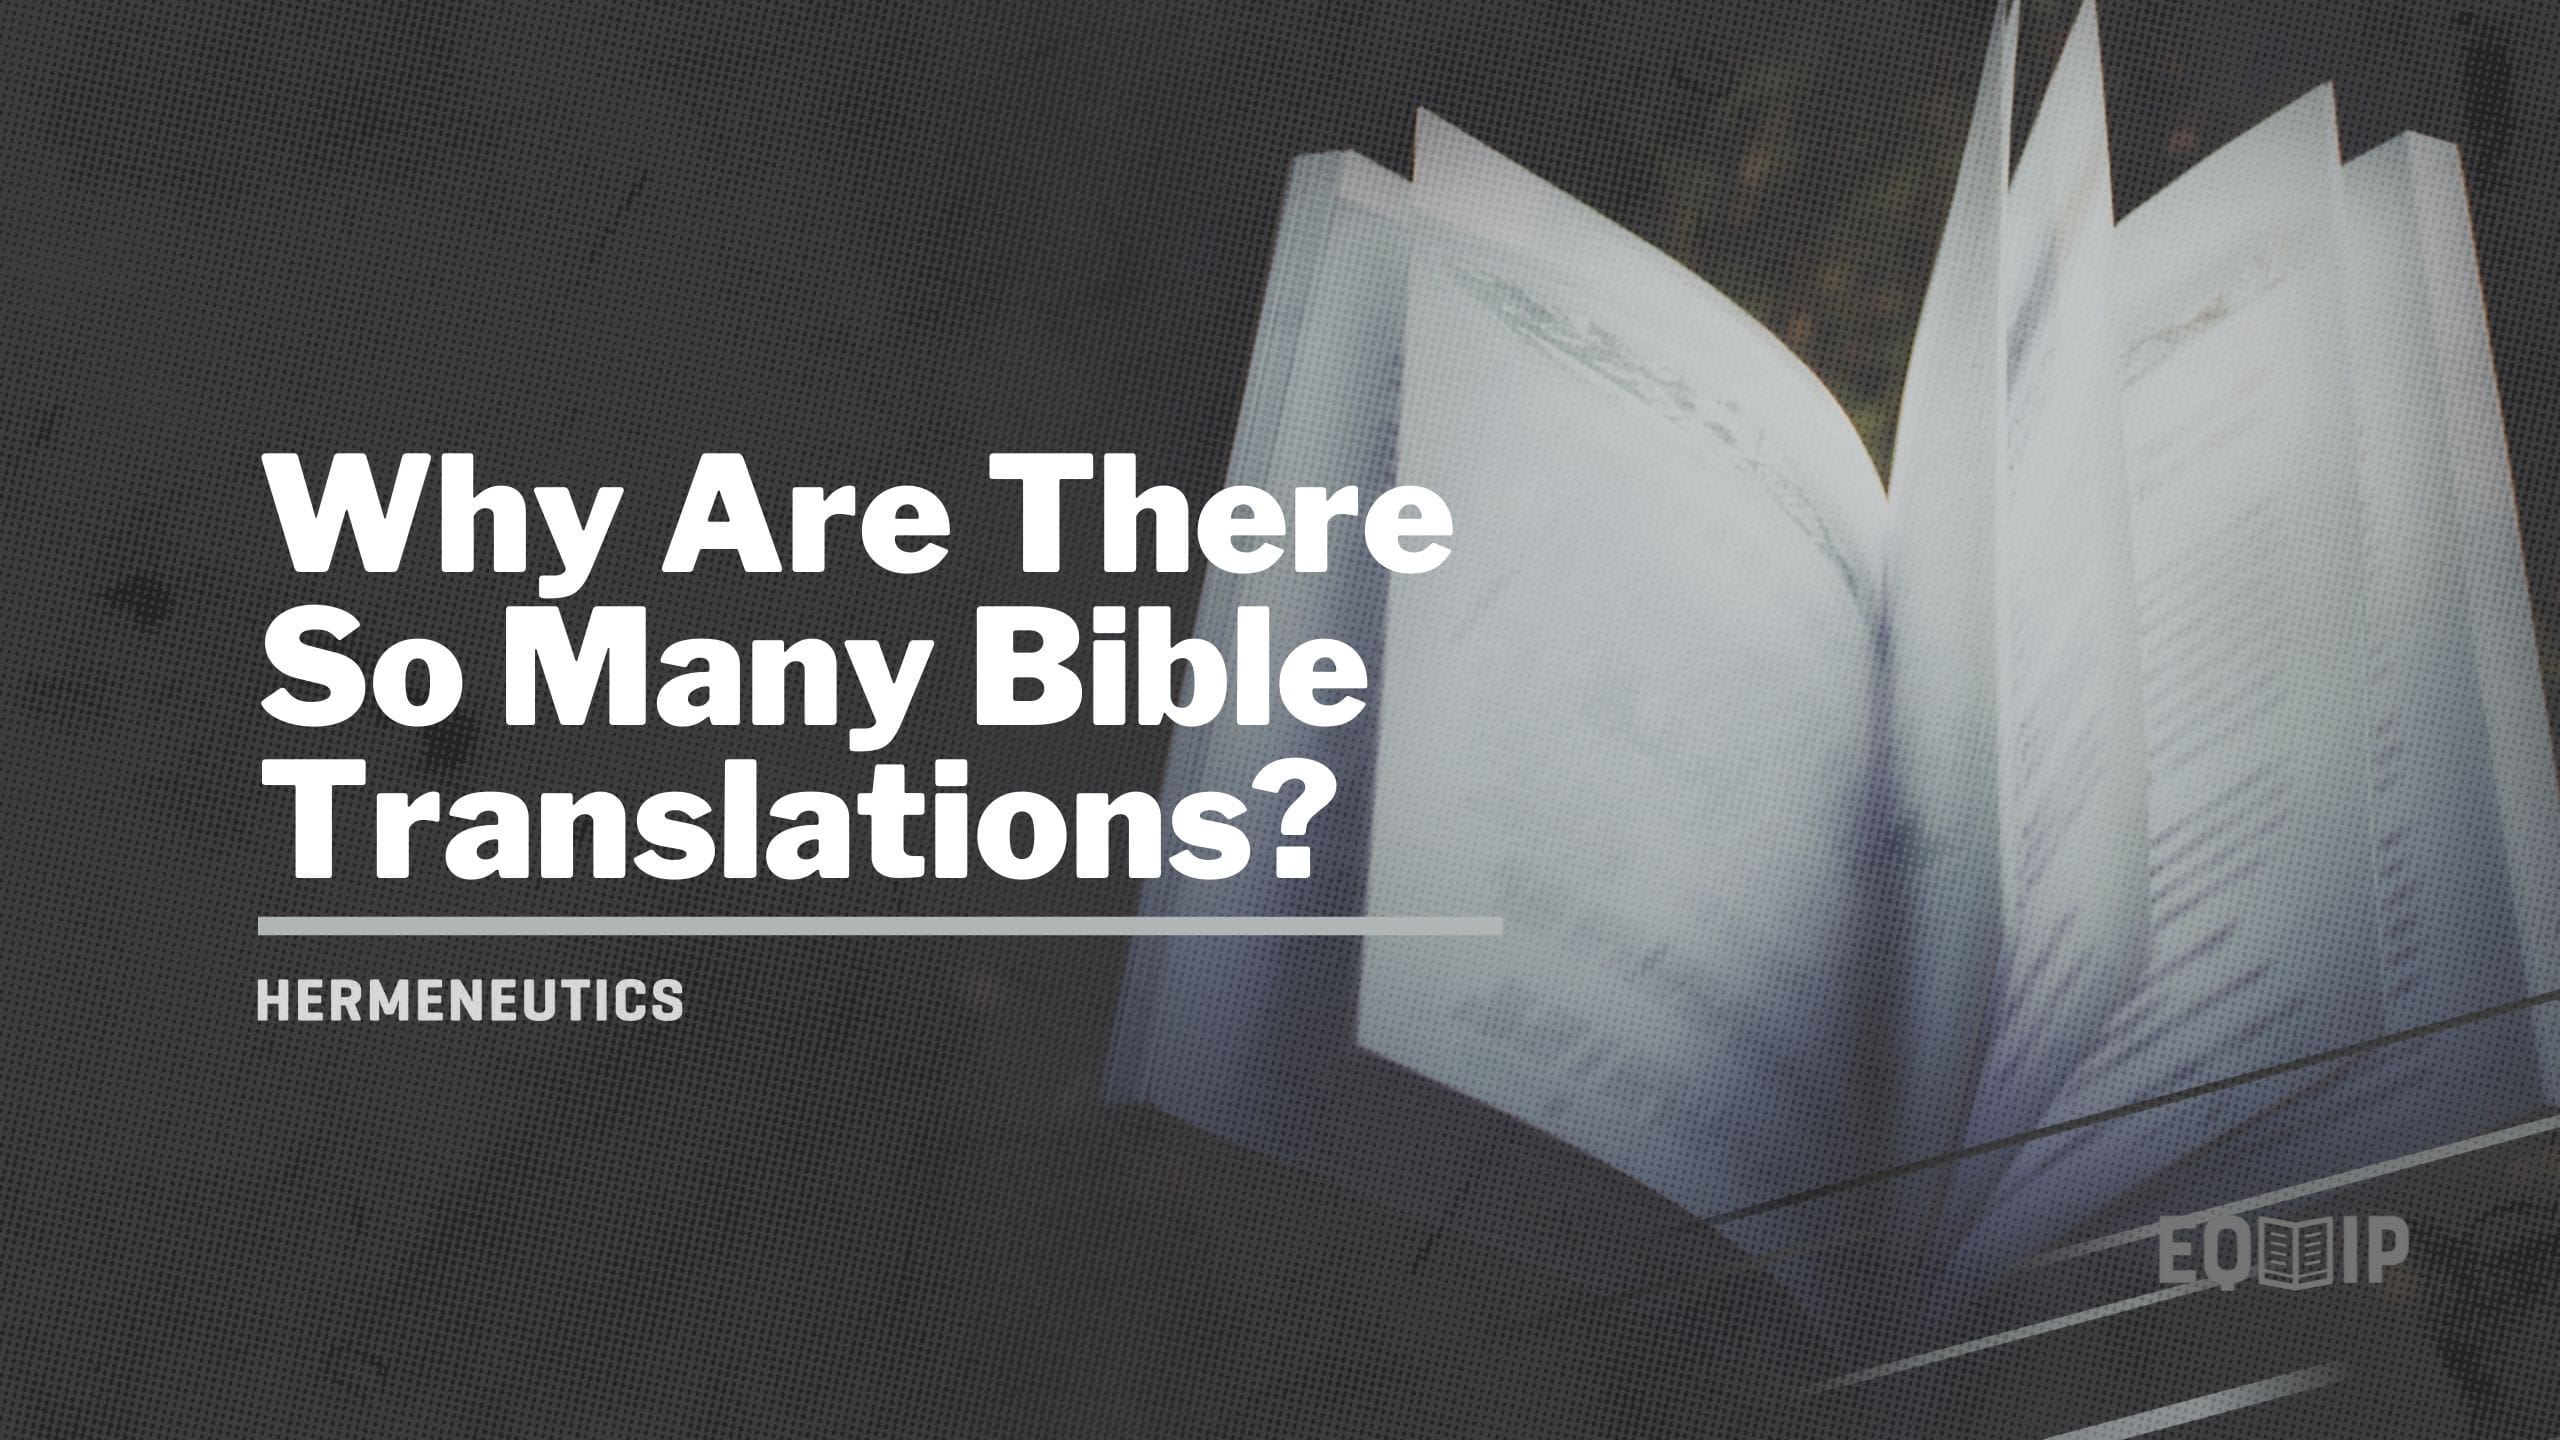 Why Are There So Many Bible Translations?